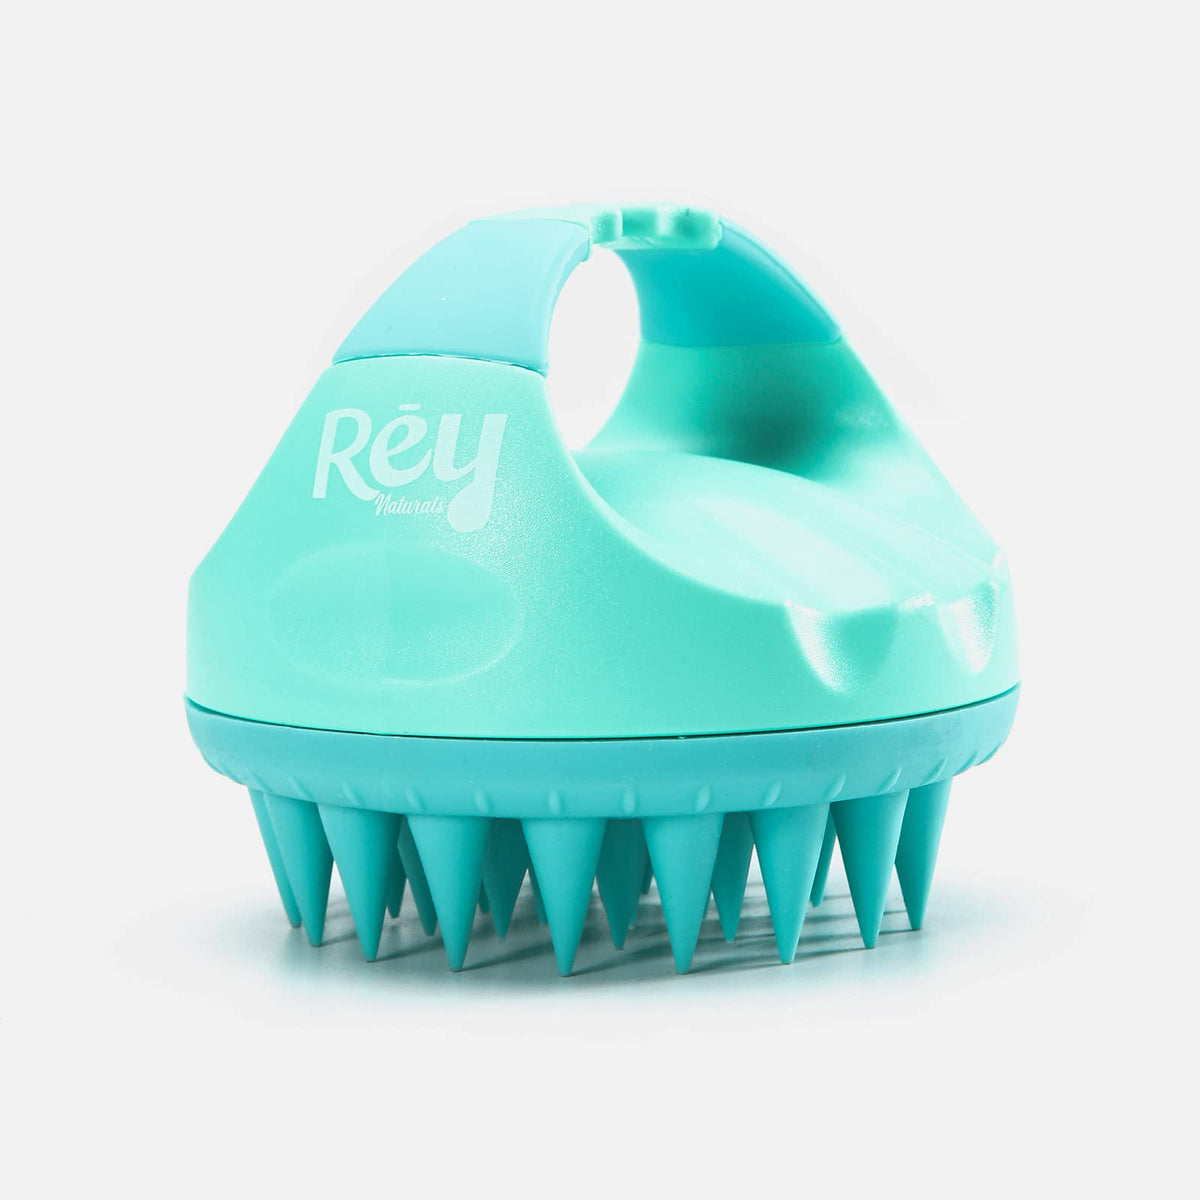 Rey Naturals Hair Scalp Massager Shampoo Brush - Hair Growth, Scalp Care, and Relaxation - Soft Bristles for Gentle Massage - Blue Color